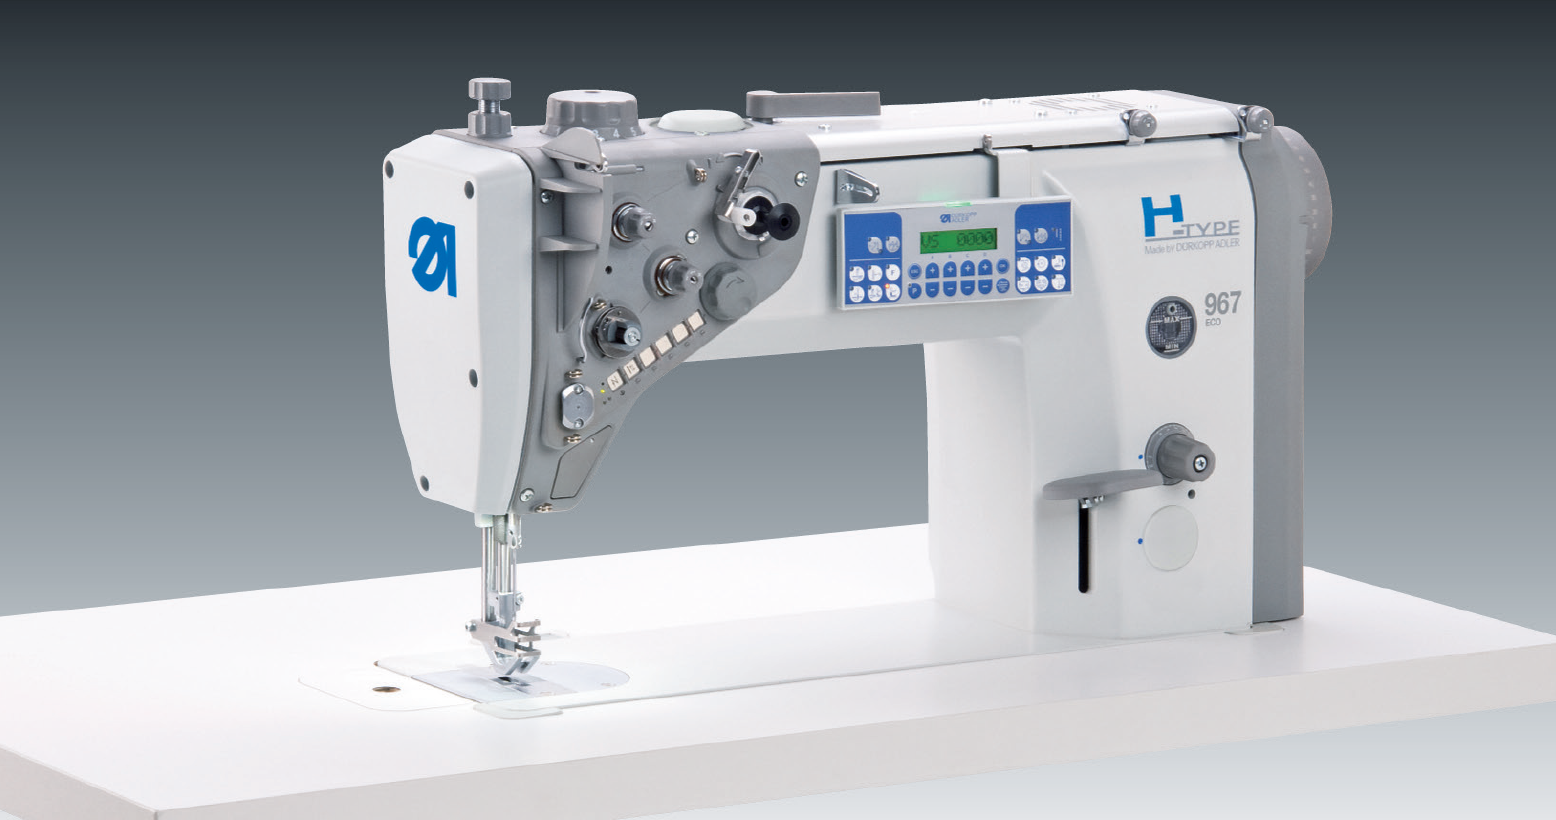 H-TYPE class 967 – ECO version of the flat bed machine for extreme applications